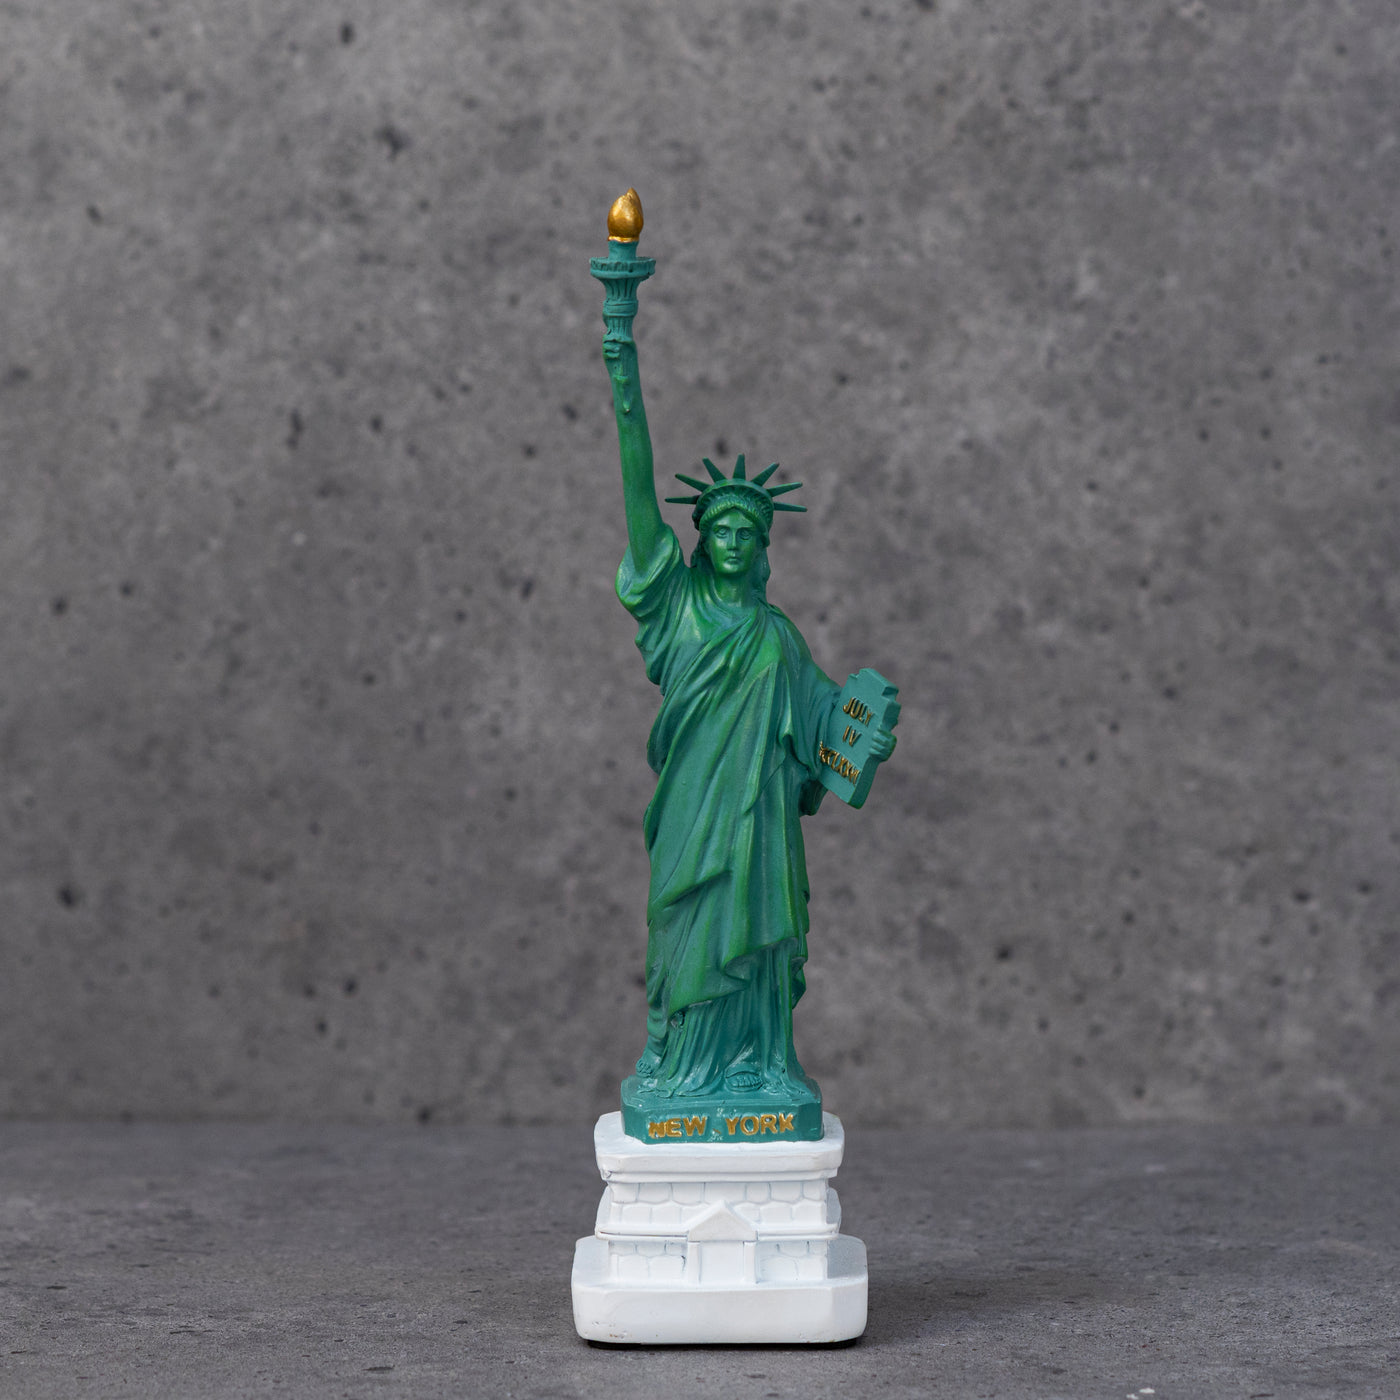 Statue of liberty statue by Home 360